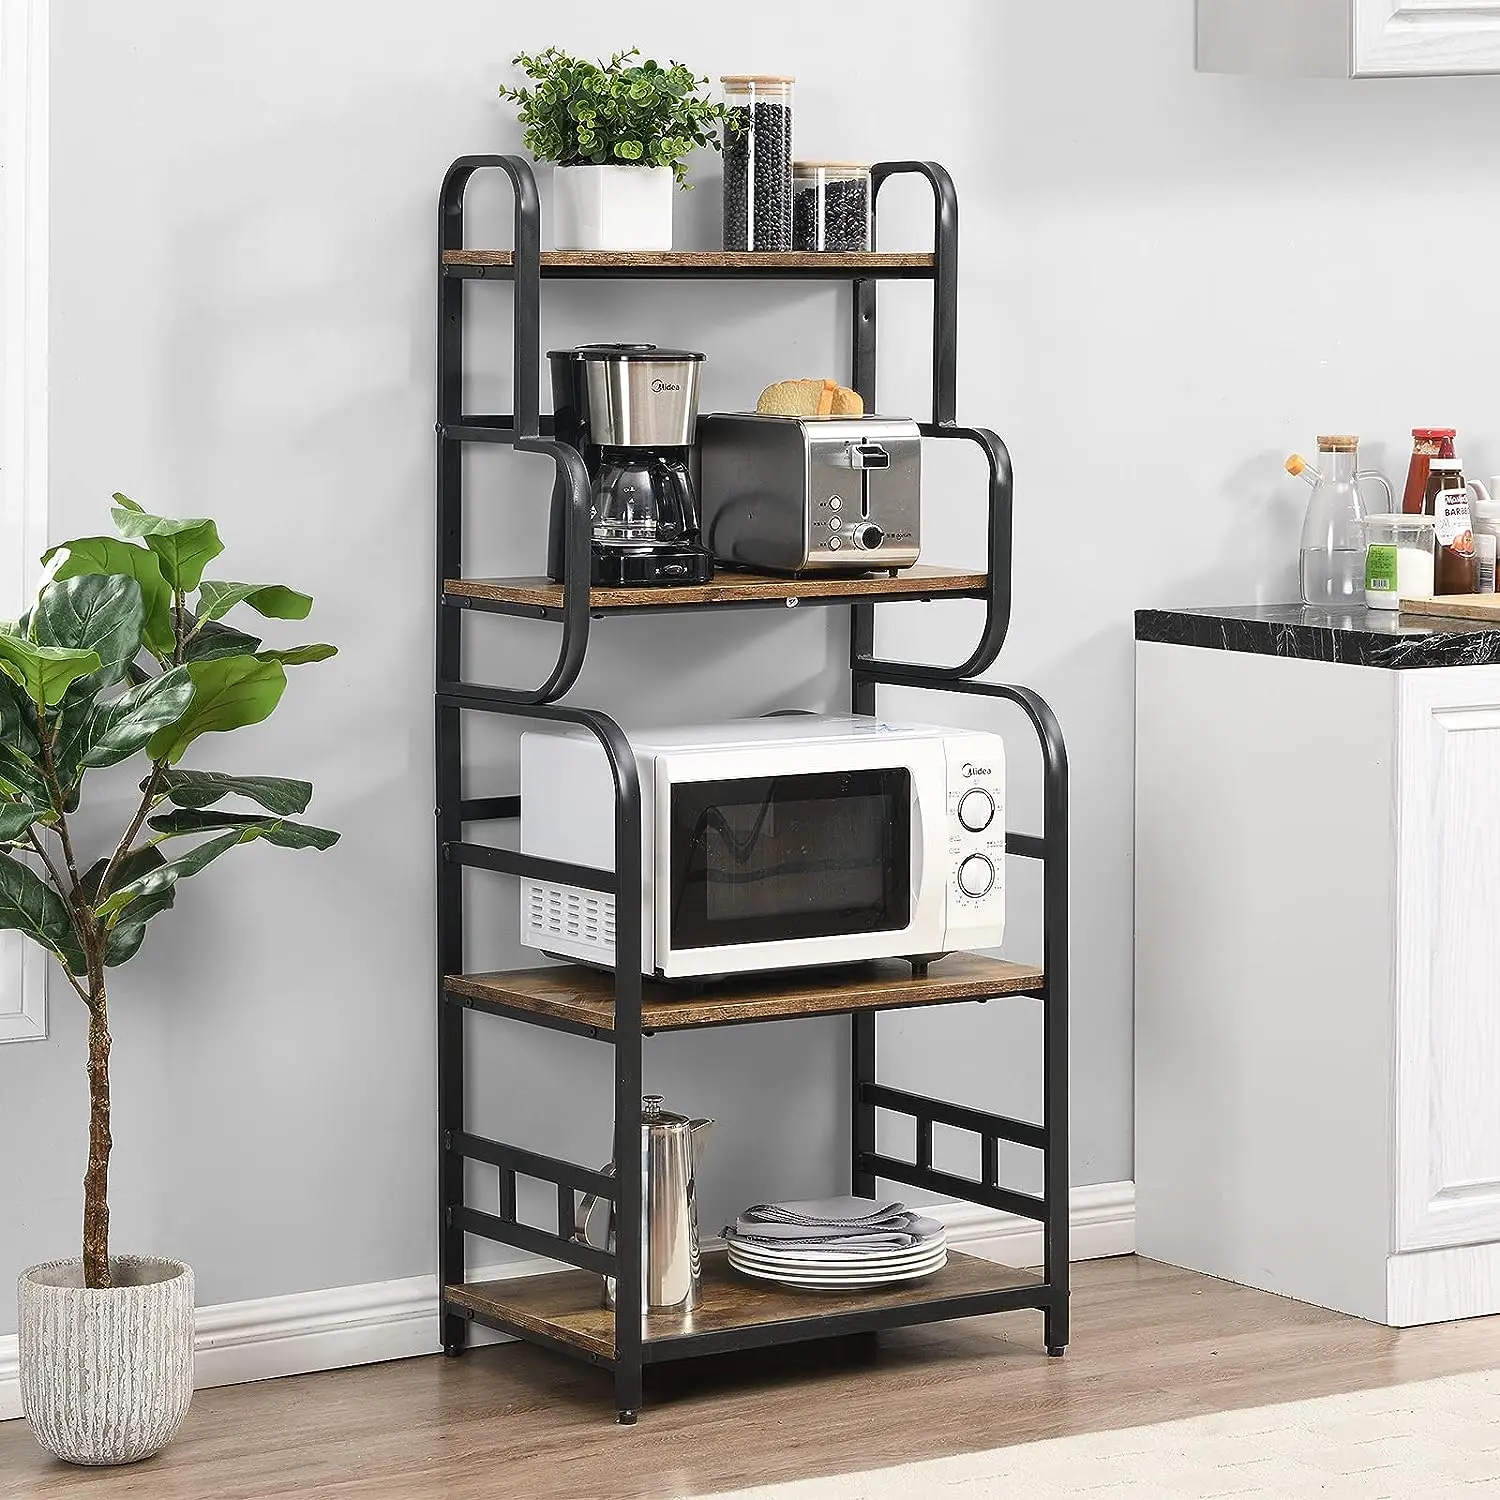 

FURNITURE Metal 4-Tier Kitchen Bakers with Storage Shelf, Standing Microwave Oven Stand Spice Organizer, Double-purpose for